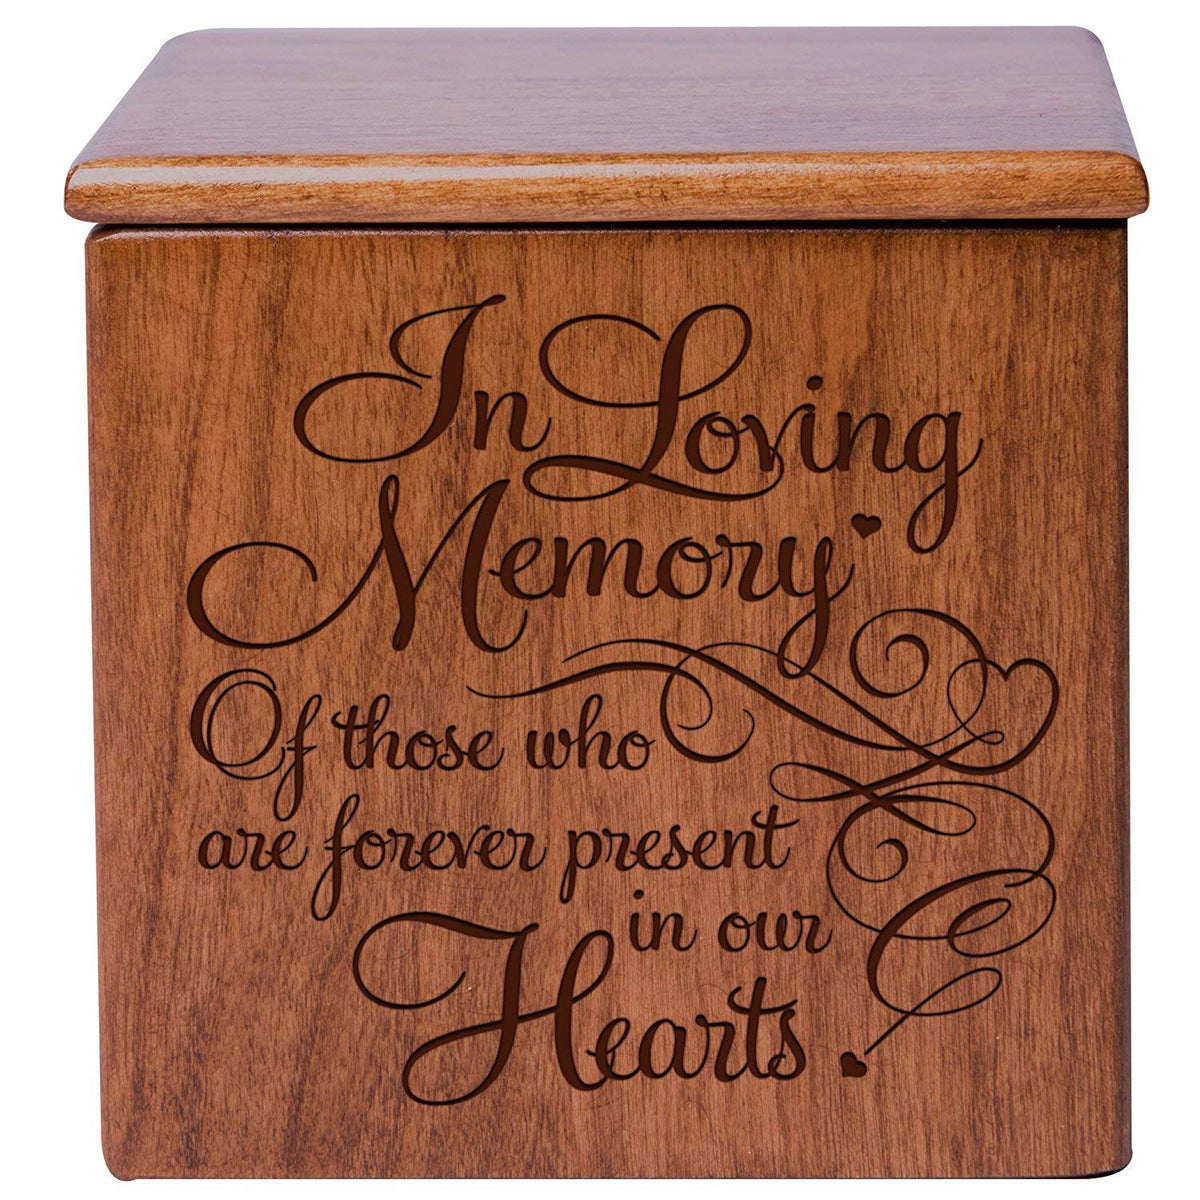 human urn ashes memorial funeral adult child cherry